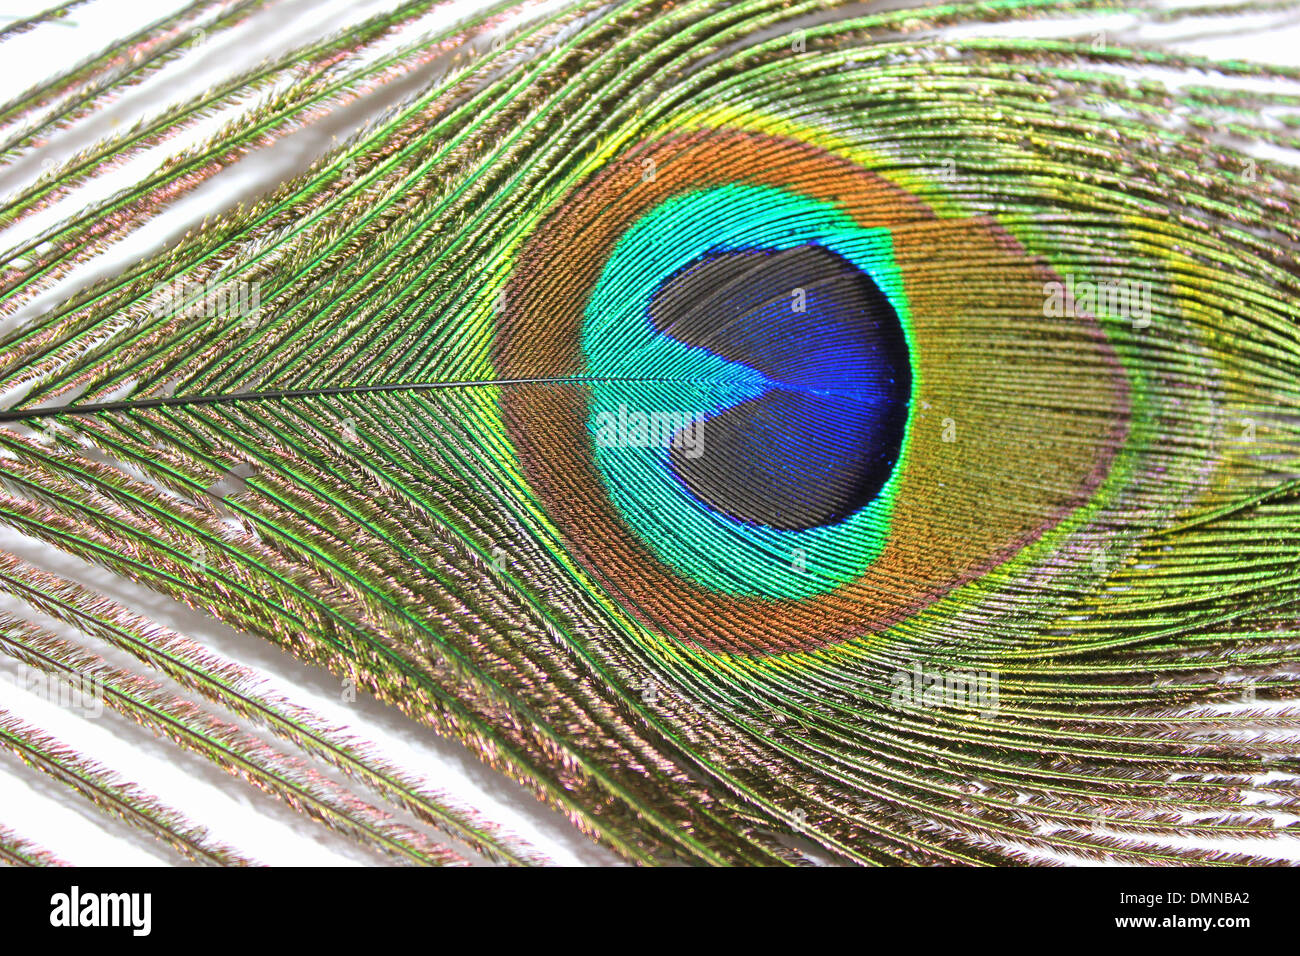 Peacock Feather Single with Beautiful Blue Eye Stock Photo